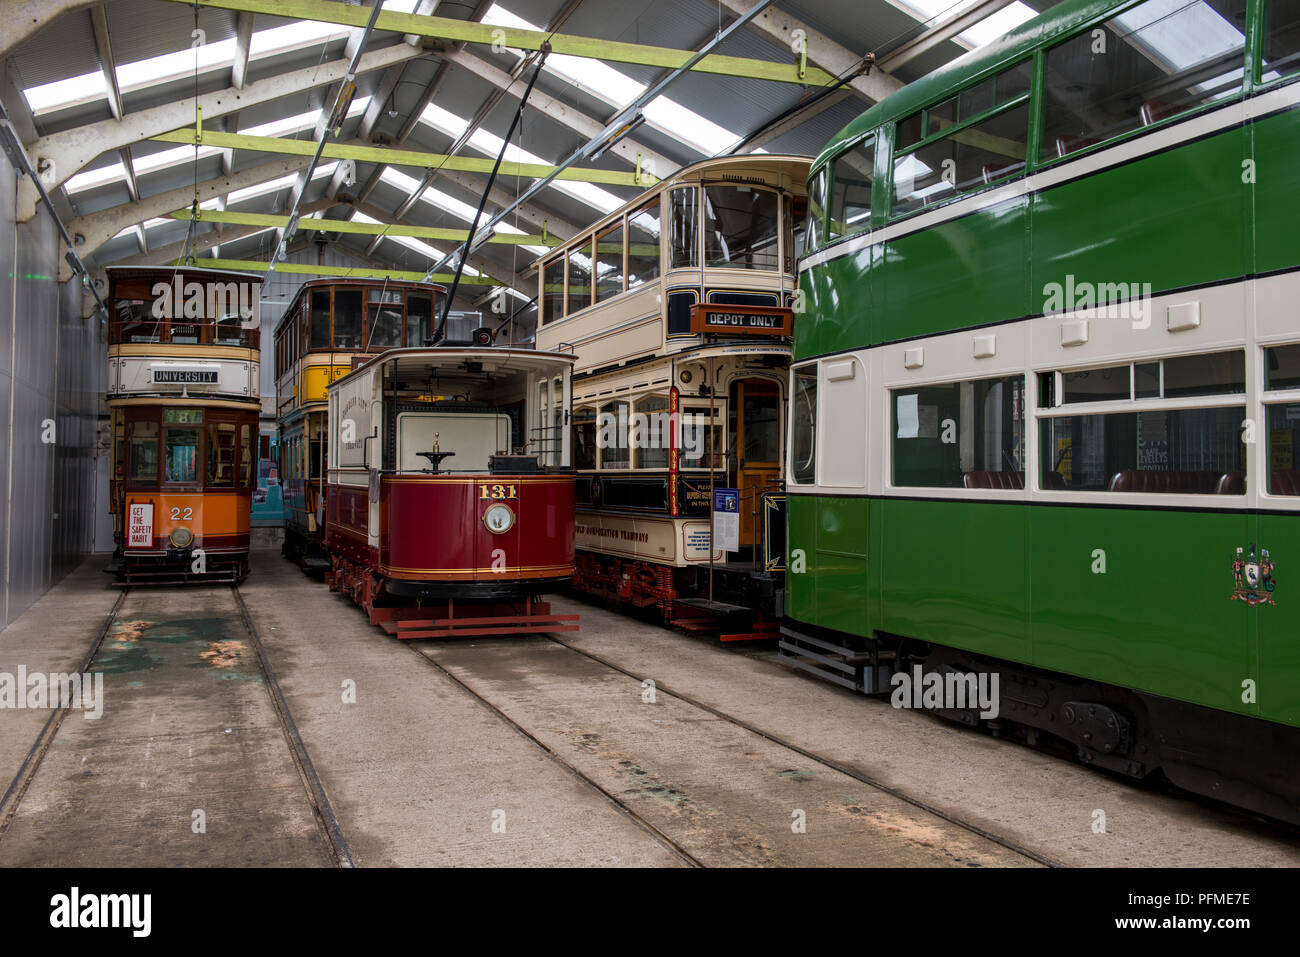 Exhibits are stored in the tram sheds and some await their turn for use within Crich Tramway Village, Derbyshire 19/08/2018 Stock Photo